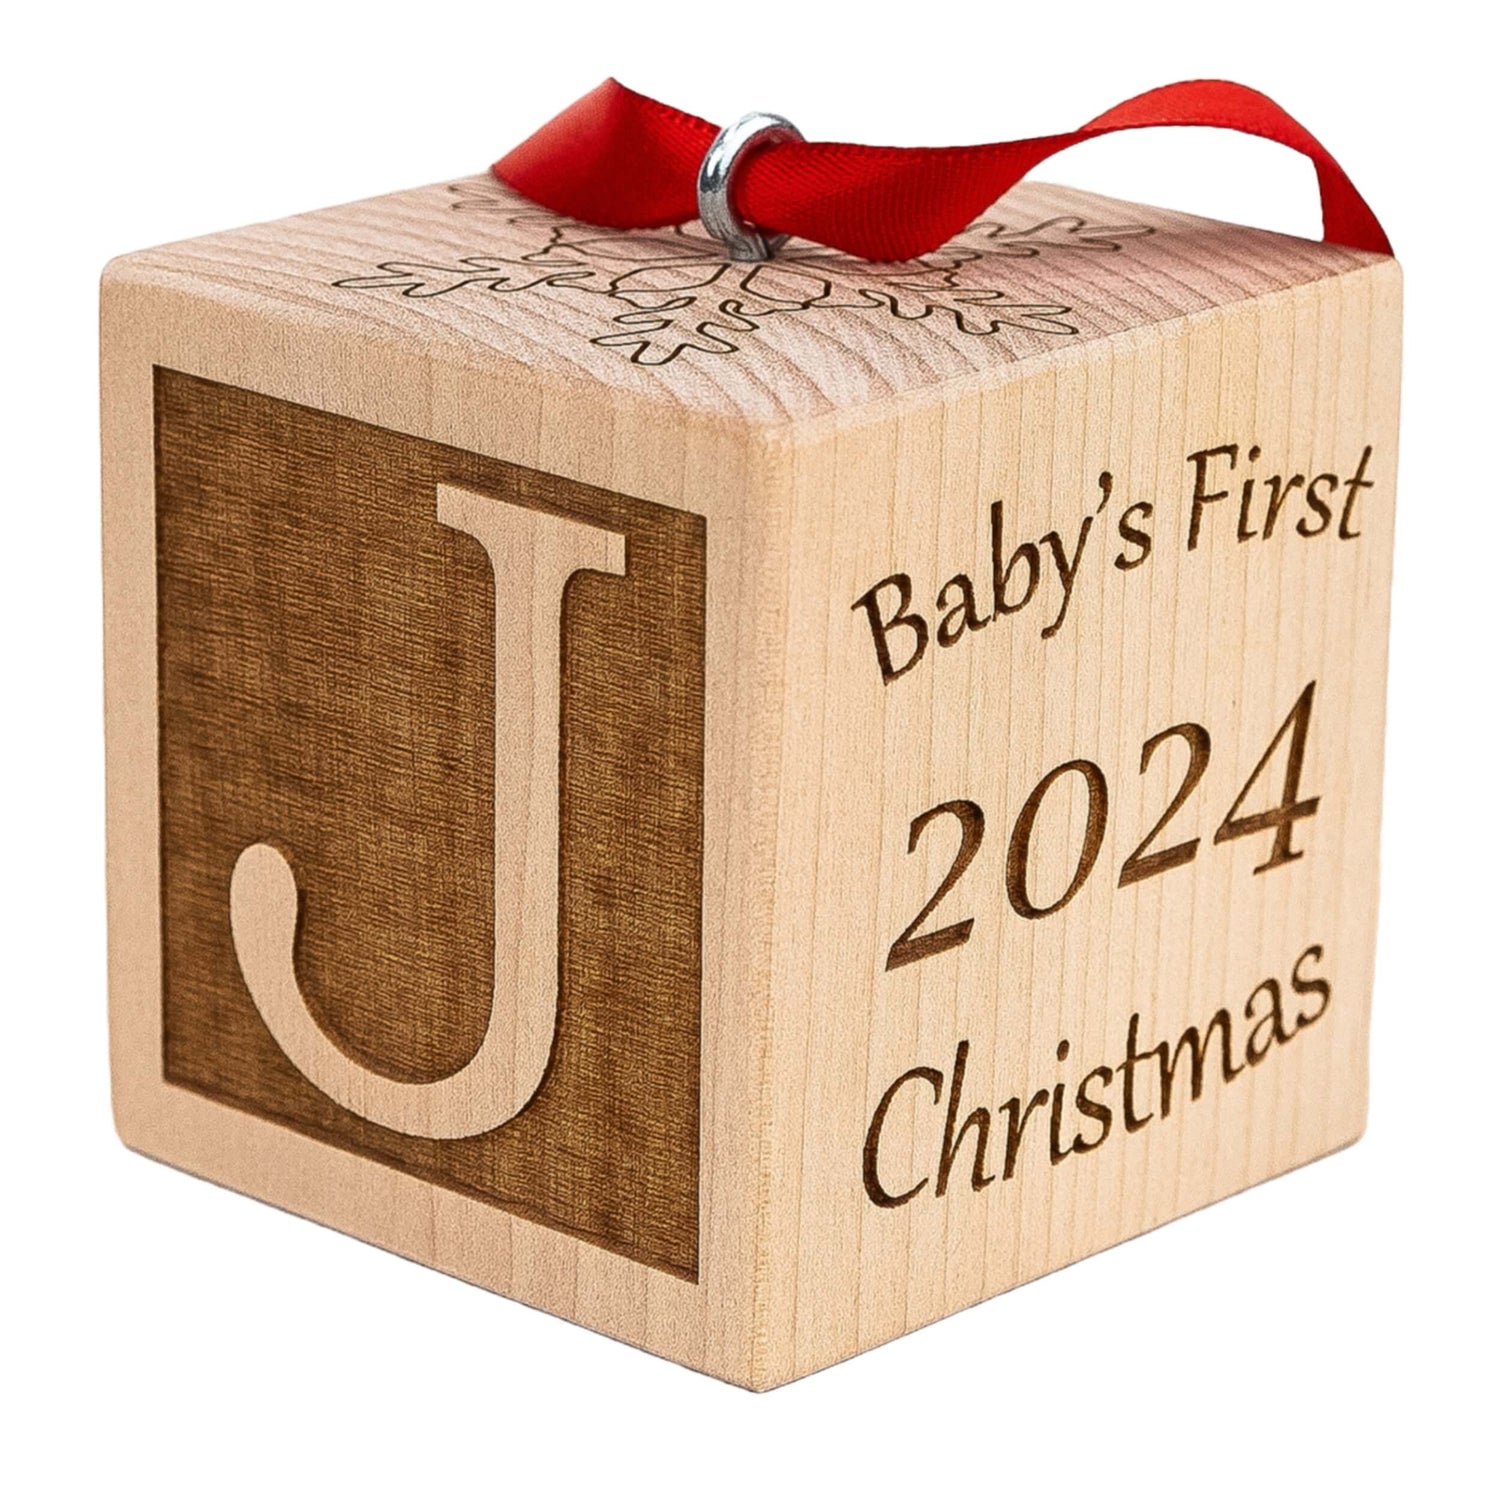 Baby's First Christmas Ornament Wooden Block with Ribbon